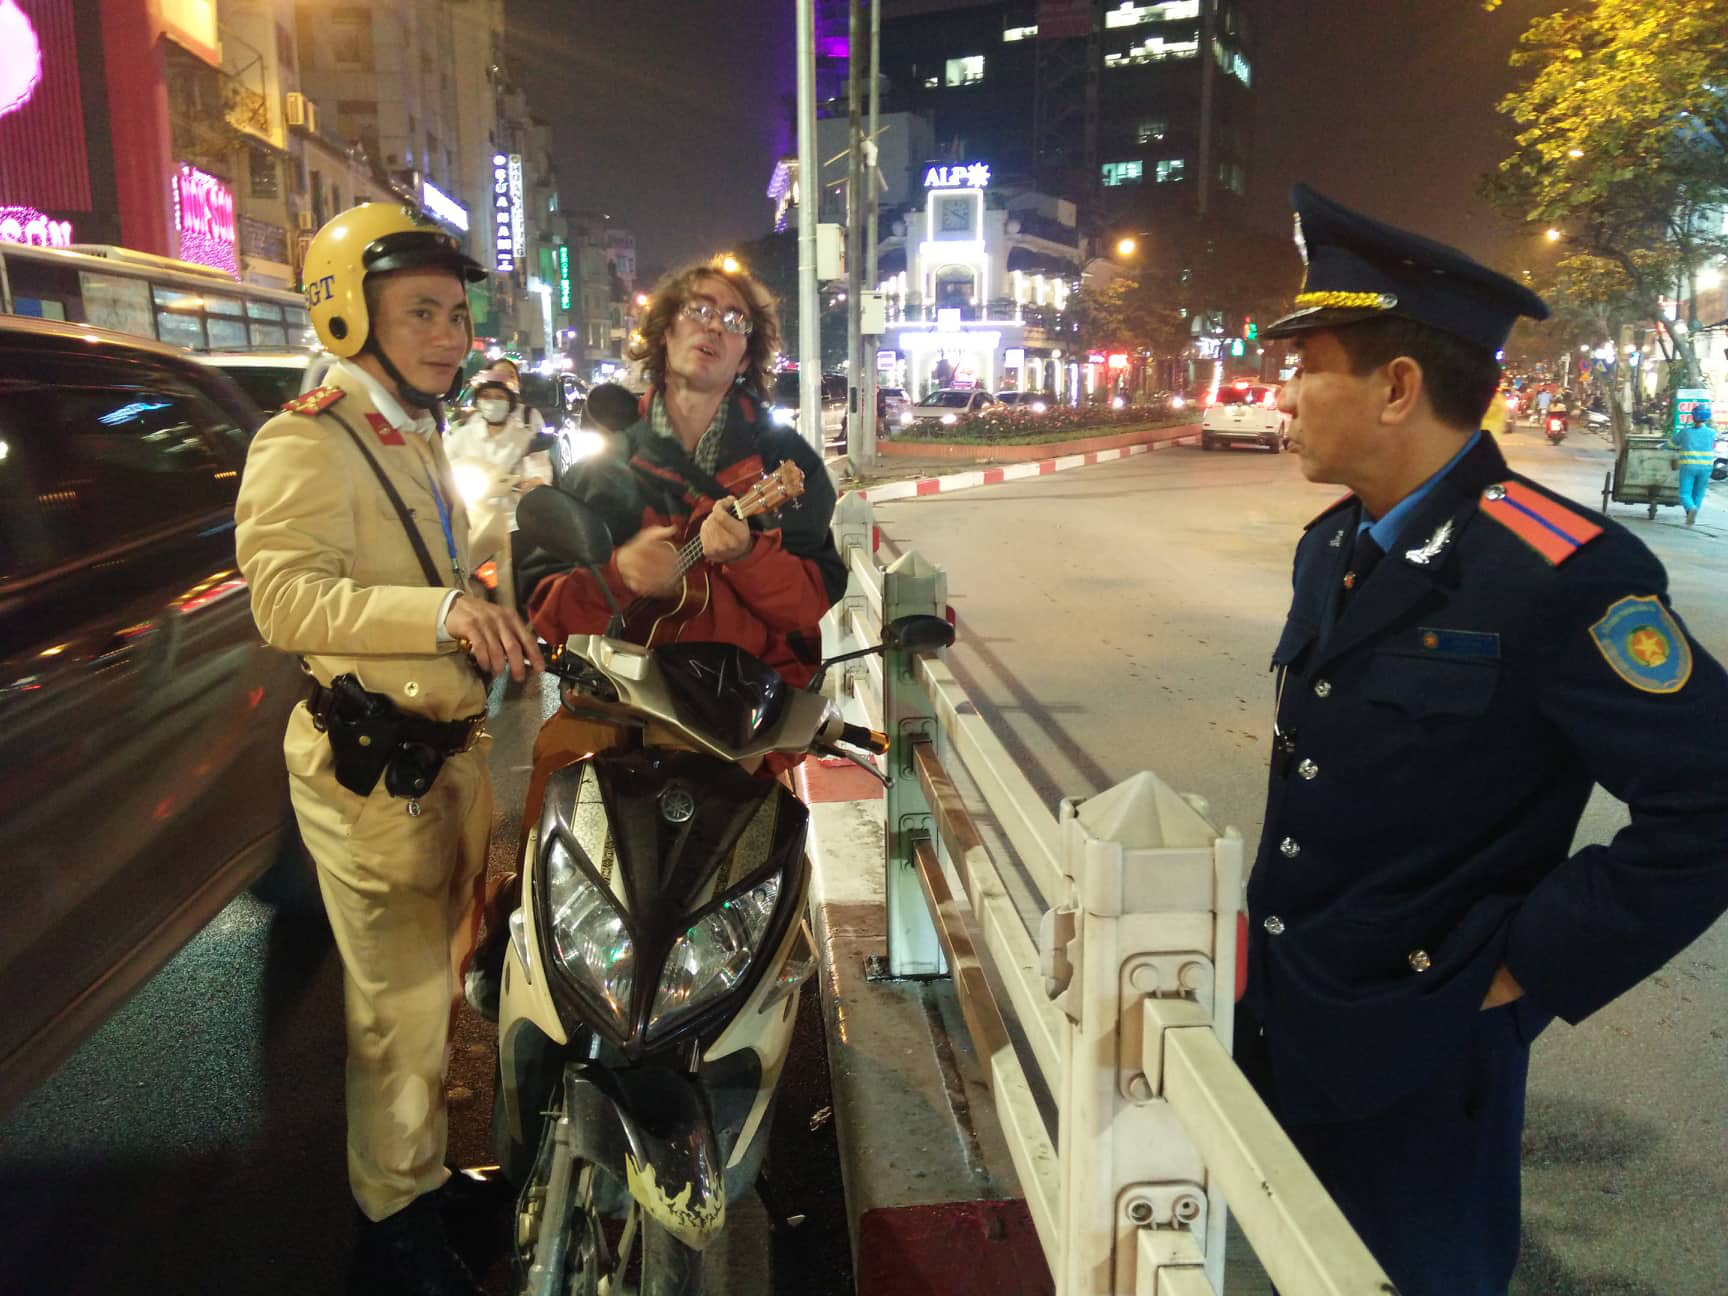 Russian man plays ukulele after pulled over by traffic police in Hanoi